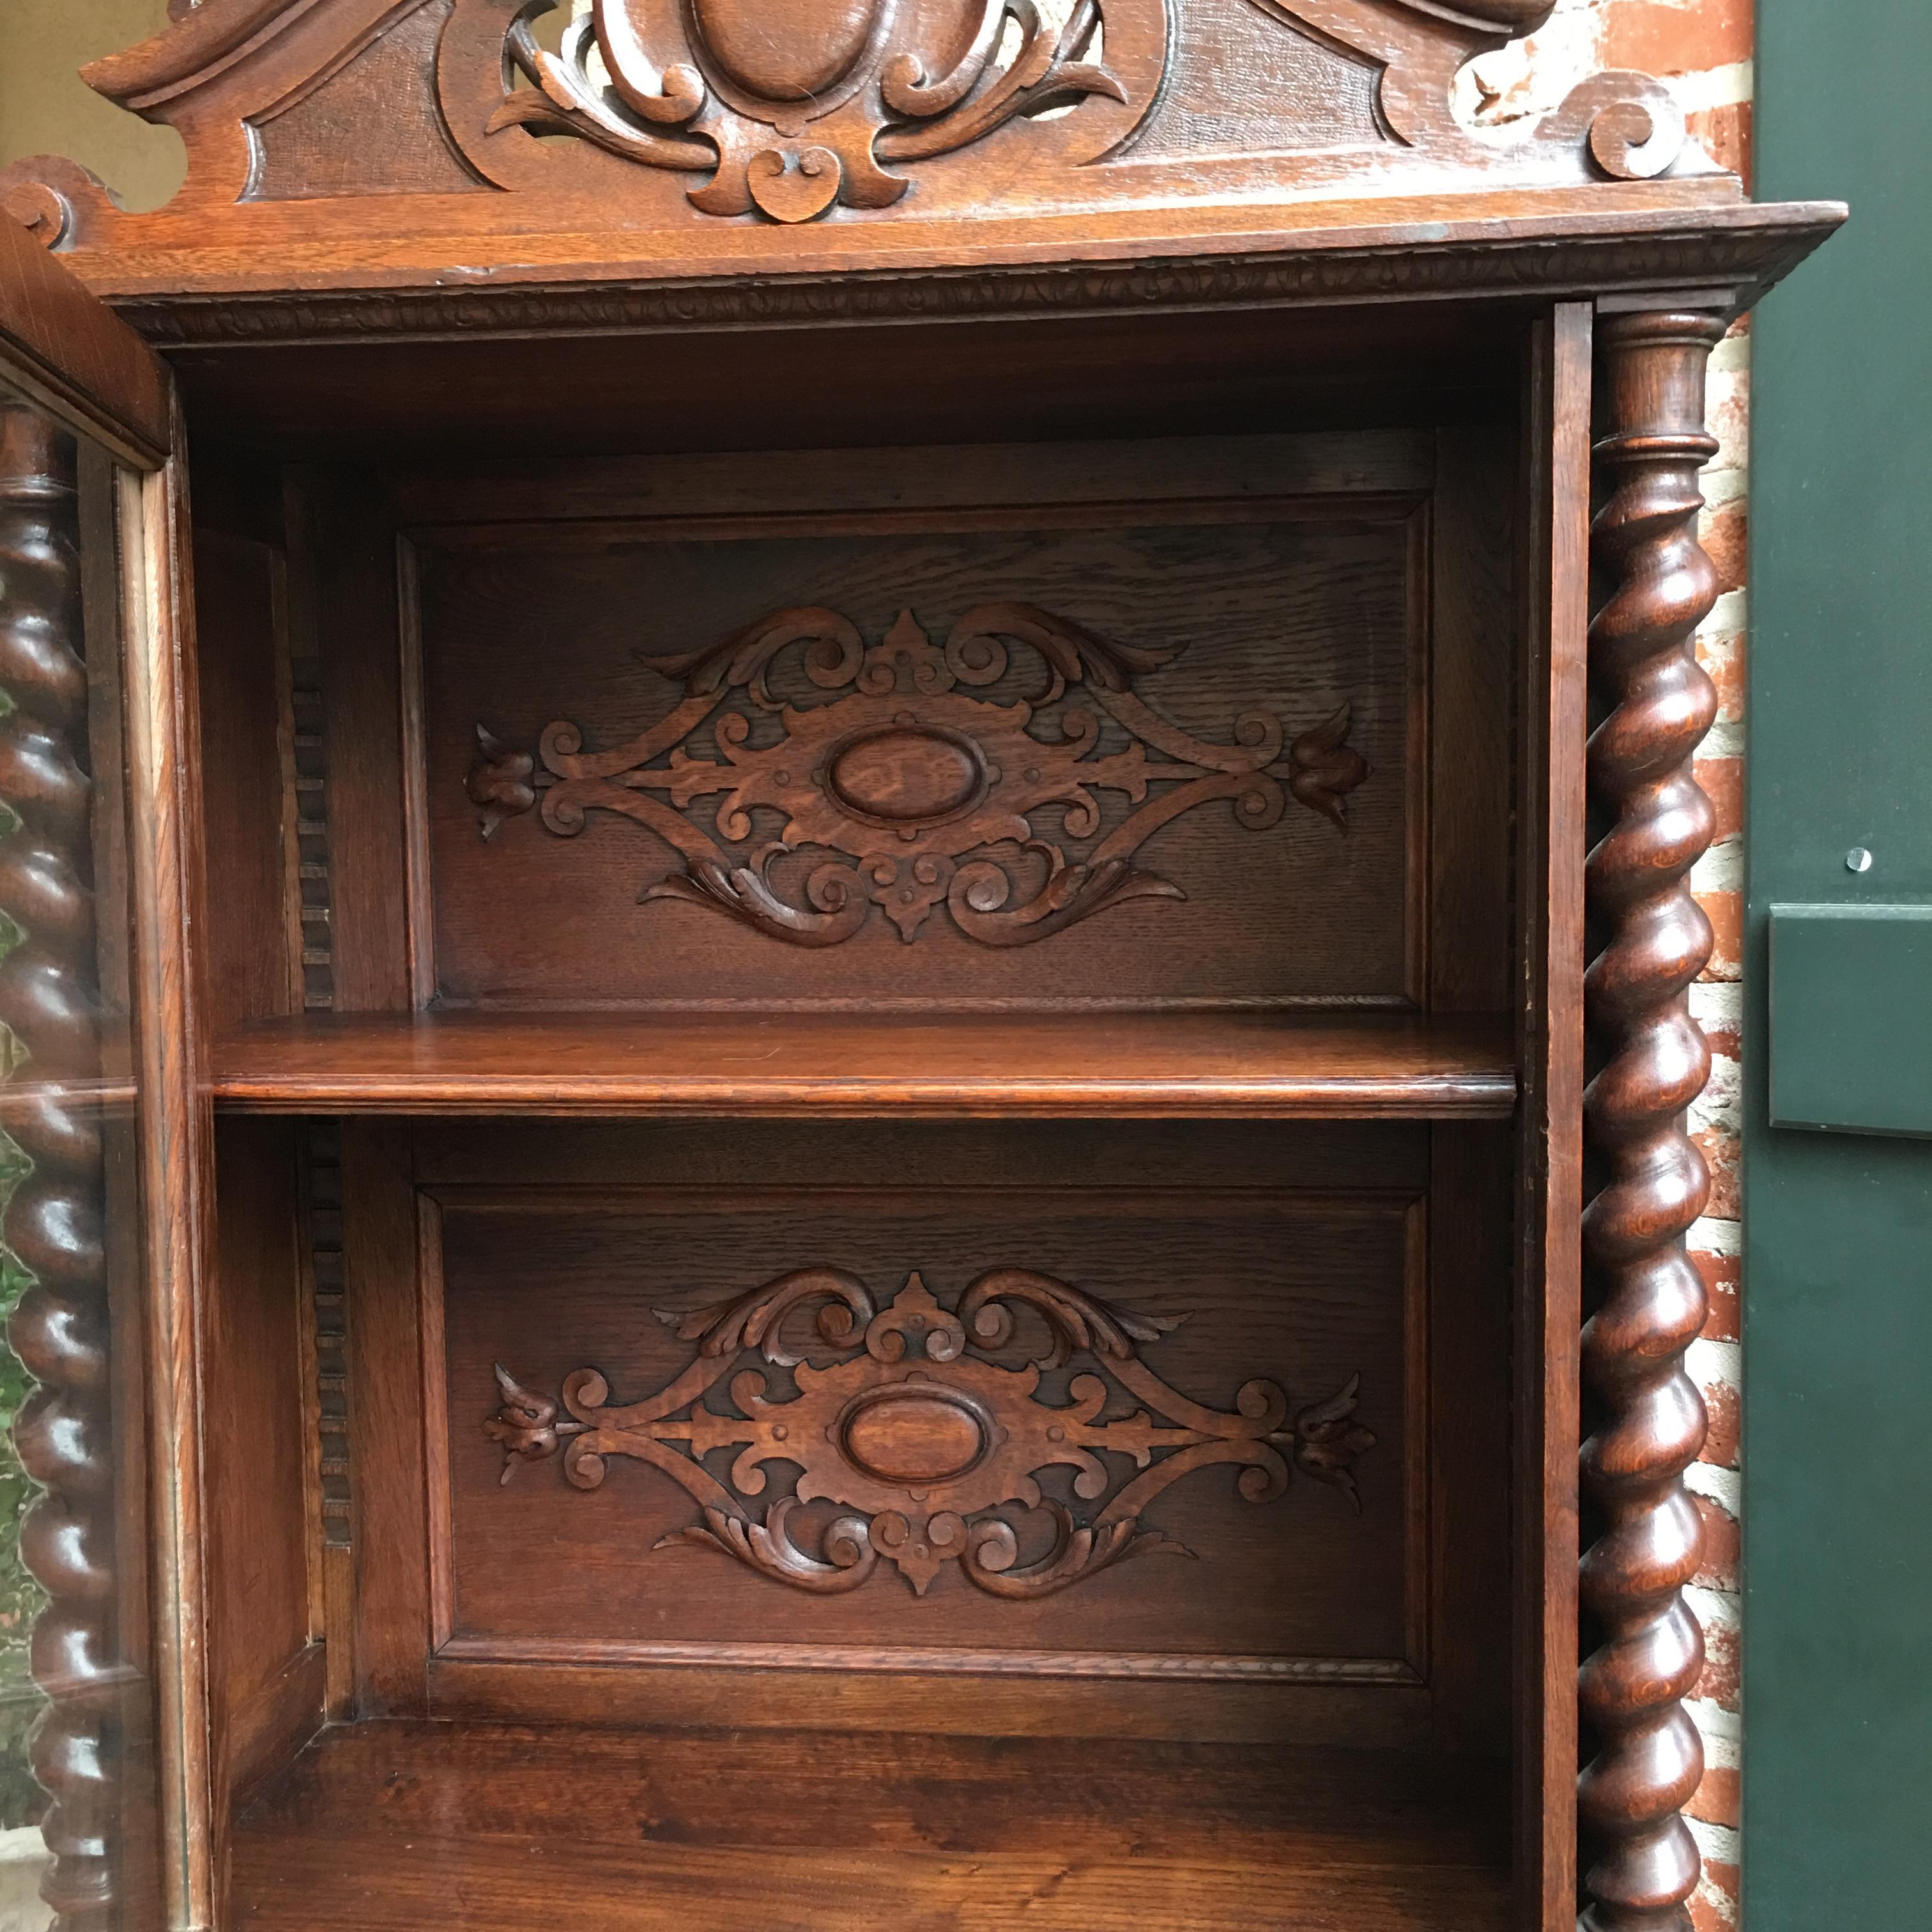 Hand-Carved 19th century French Barley Twist Display Cabinet Vitrine Bookcase Carved Oak For Sale